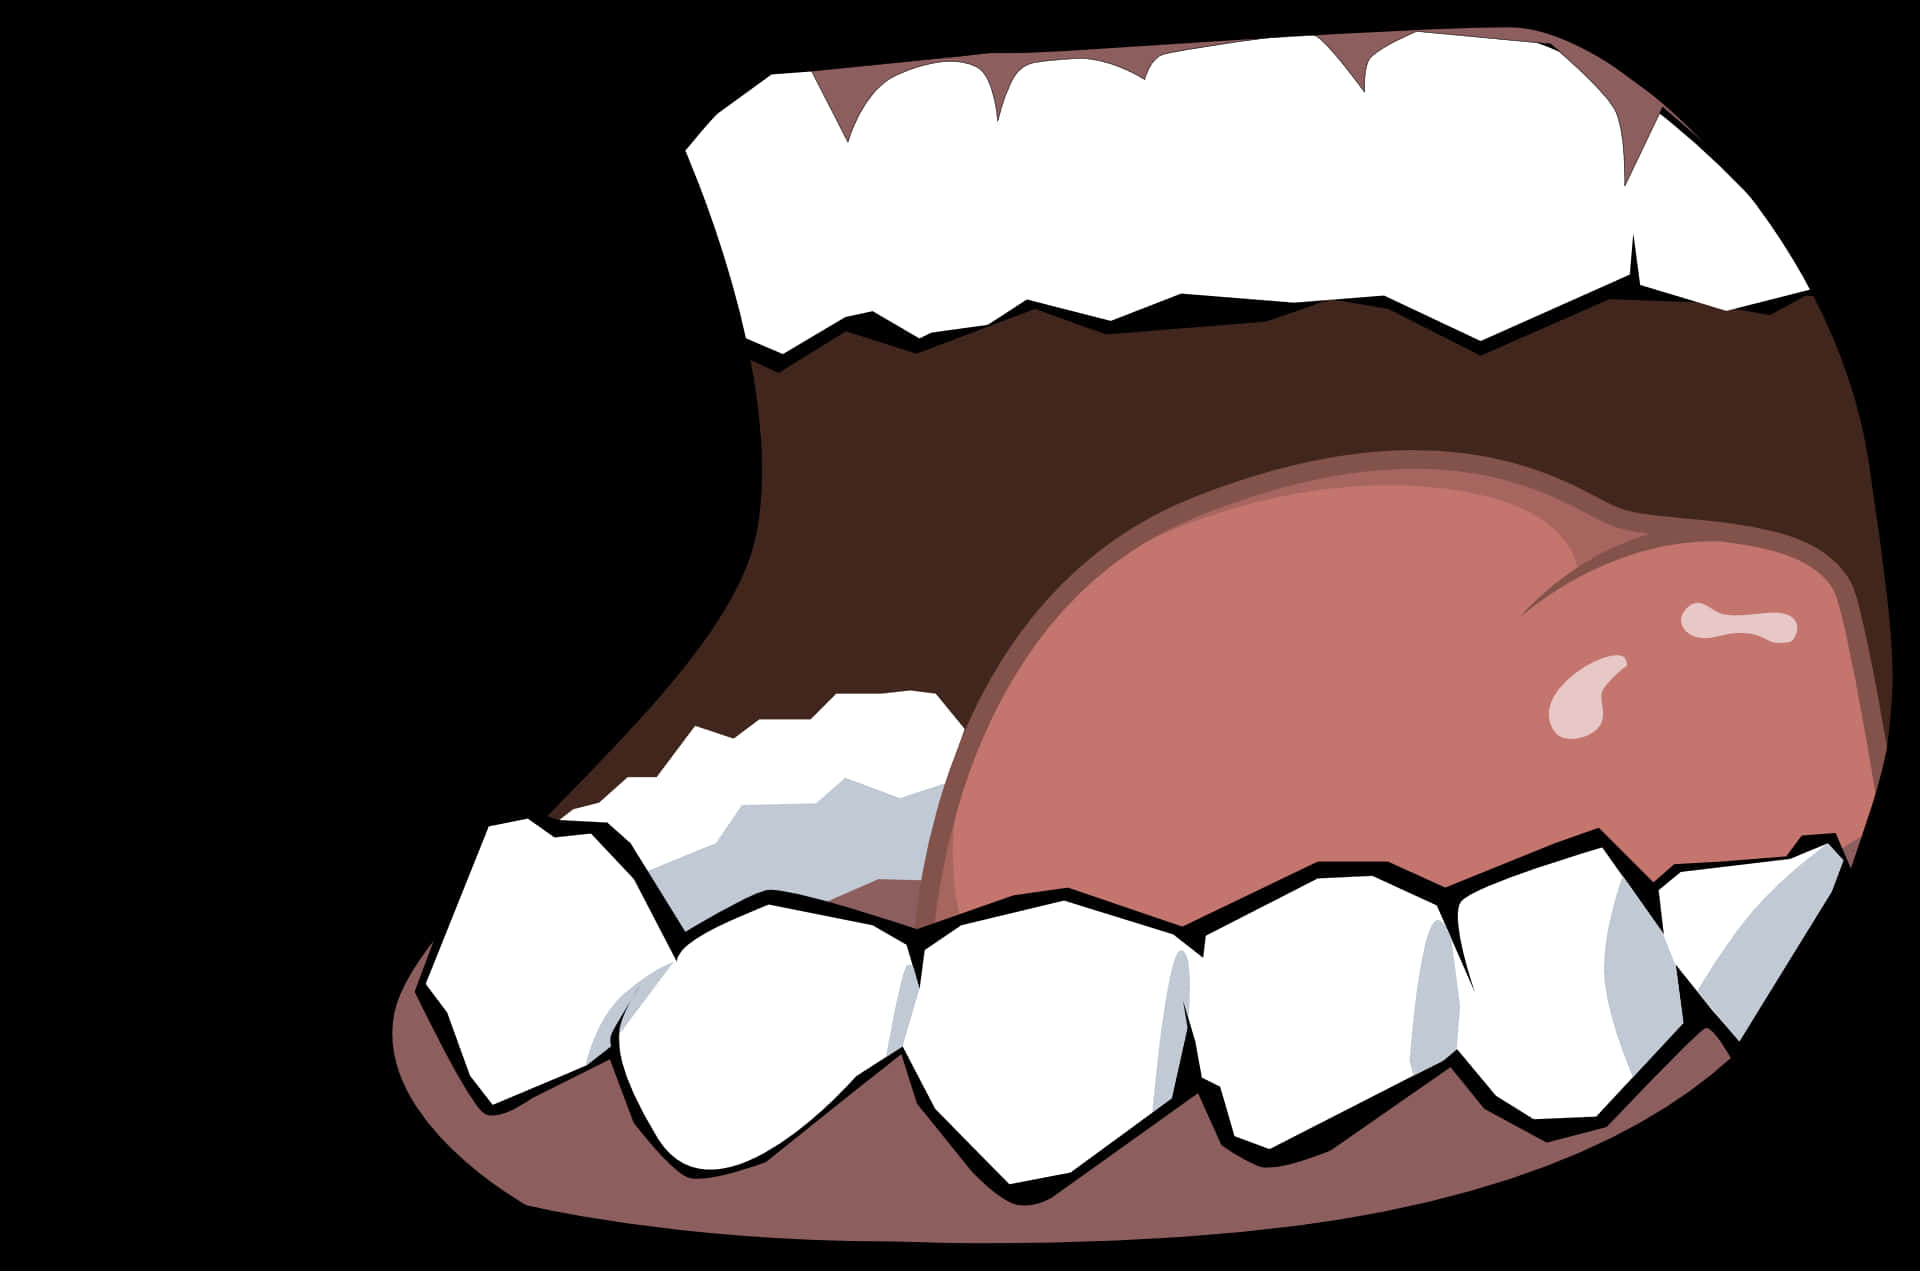 A Cartoon Of A Mouth With Teeth And Tongue